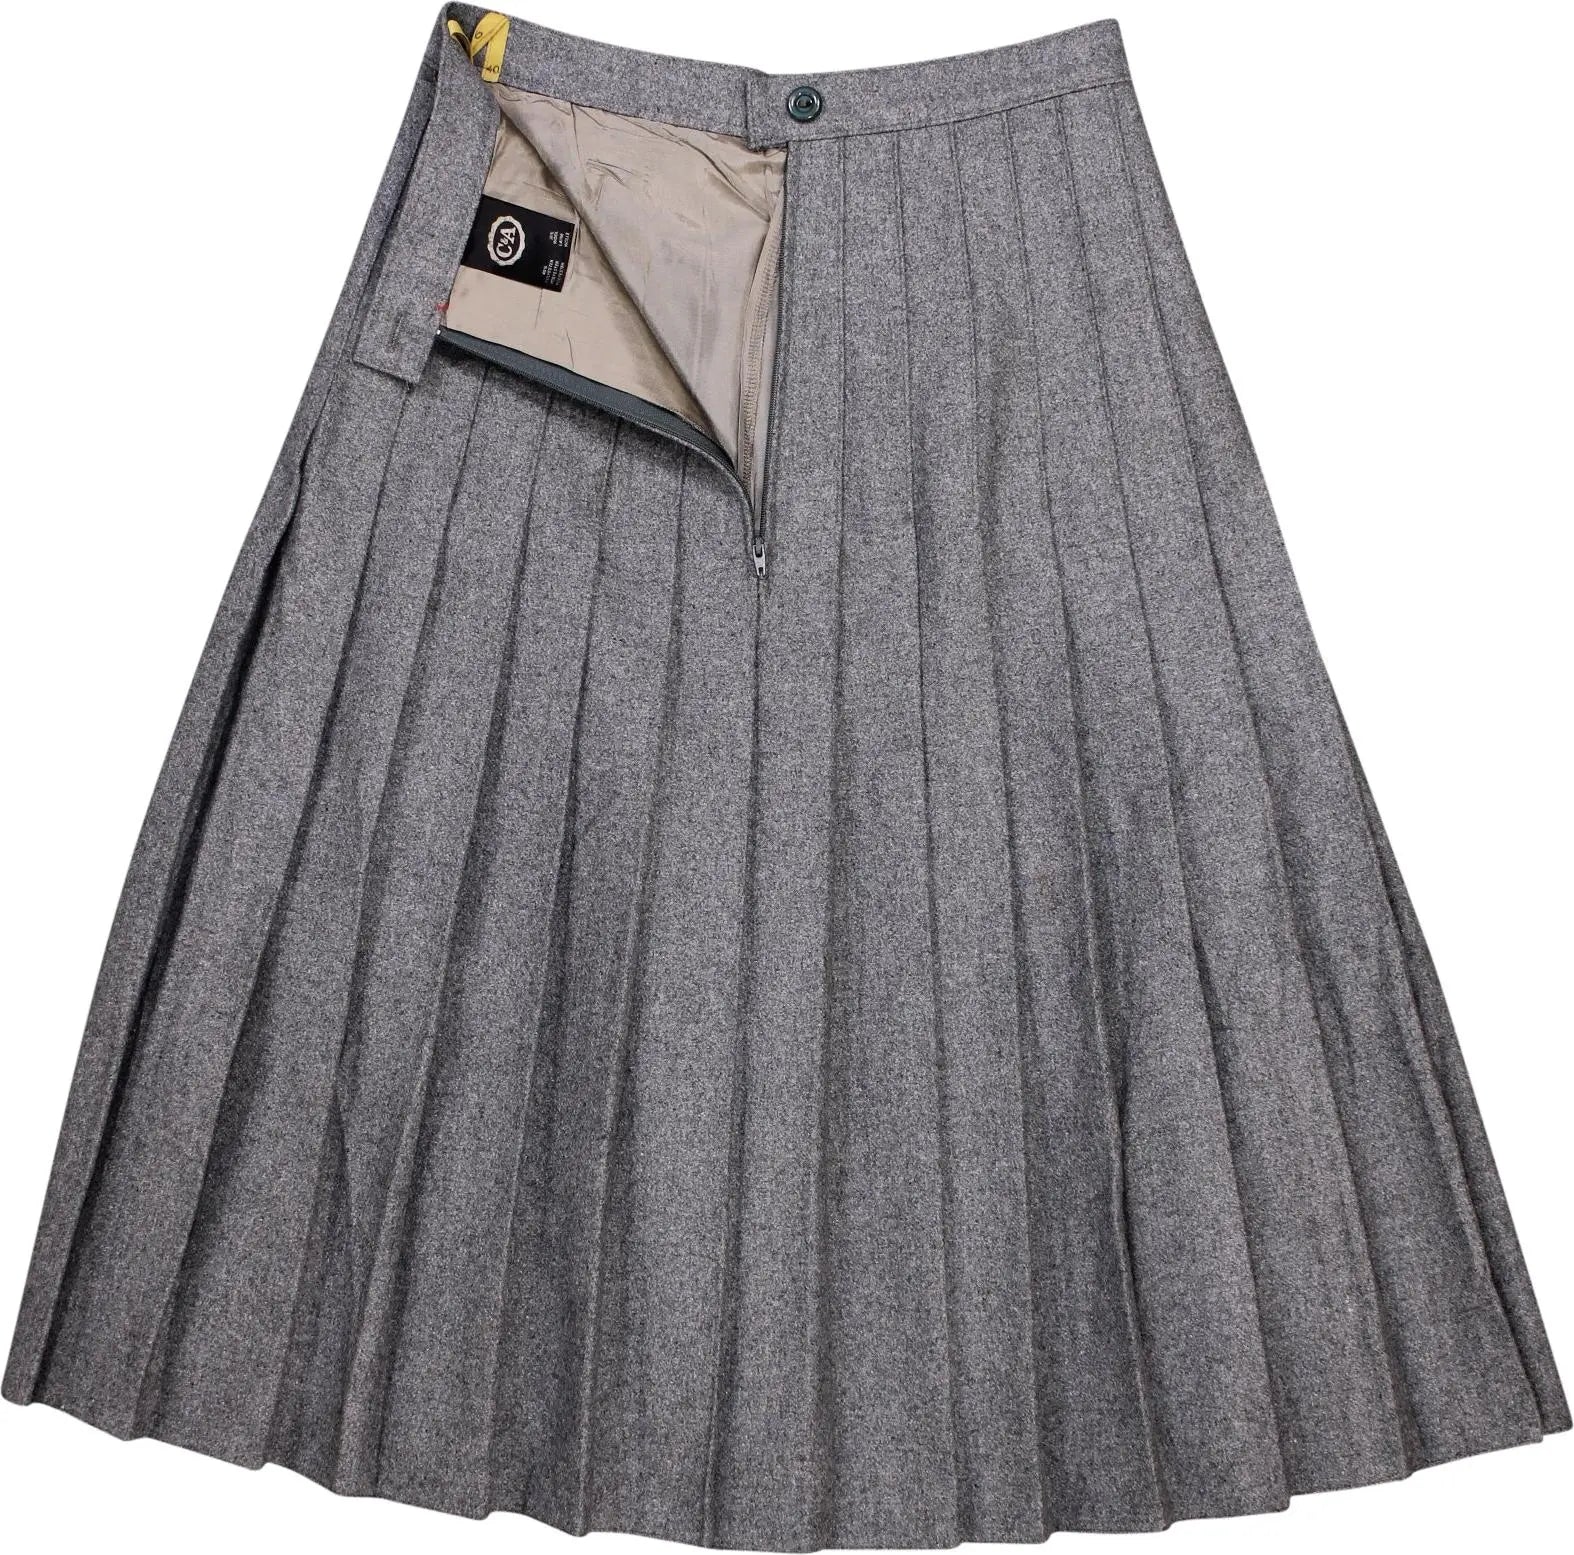 C&A - Grey Pleated Skirt- ThriftTale.com - Vintage and second handclothing